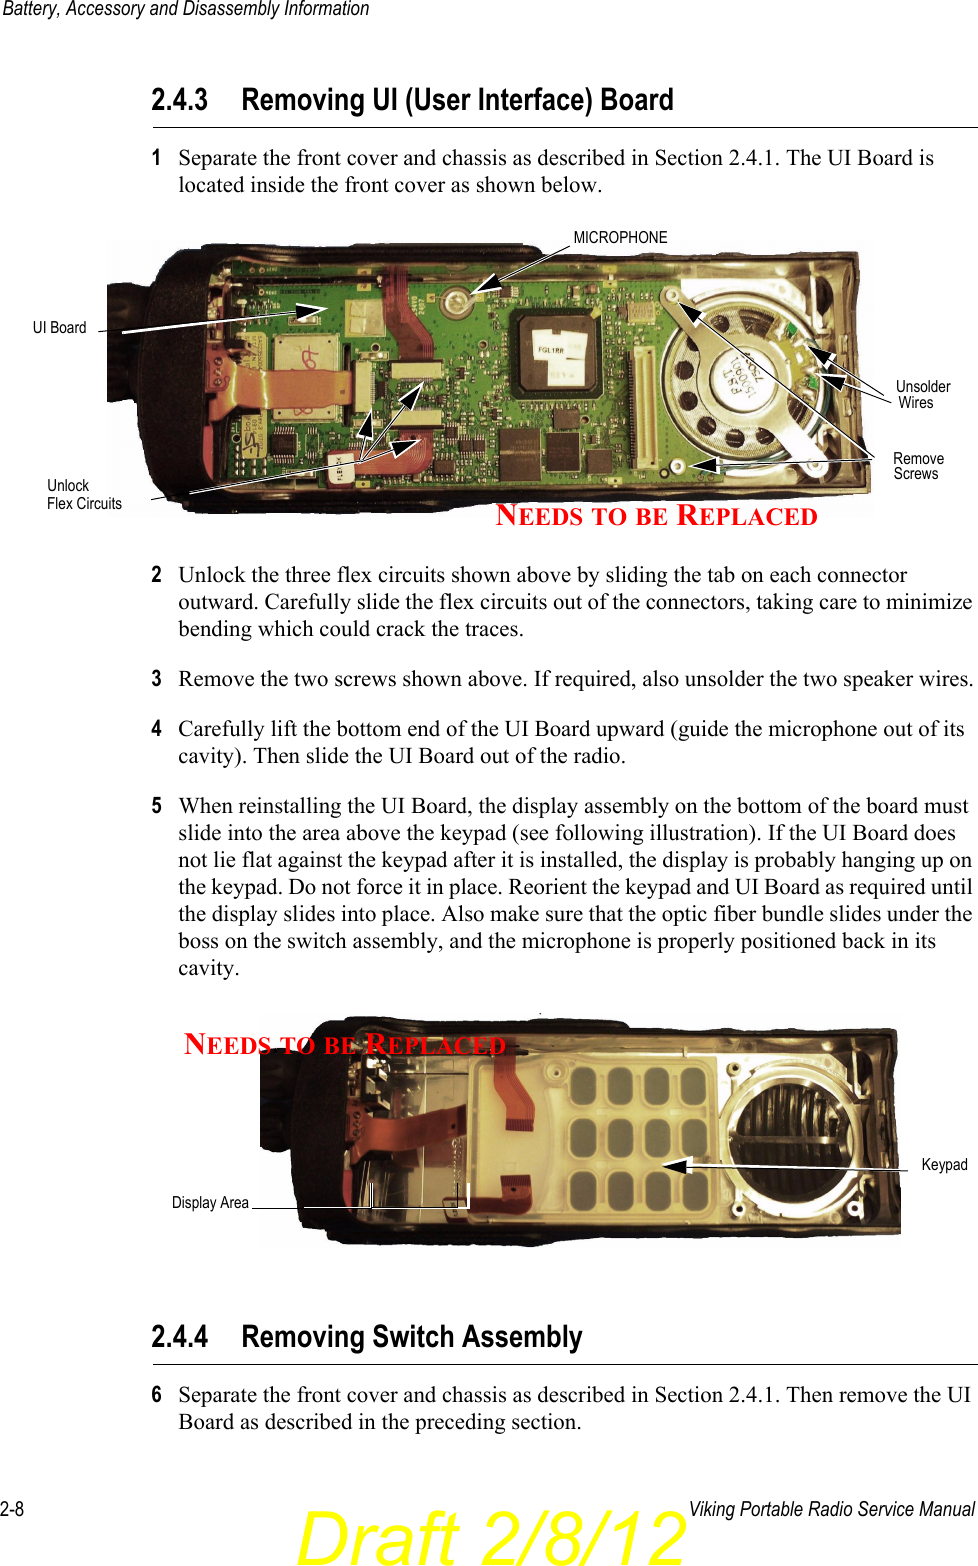 Draft 2/8/122-8 Viking Portable Radio Service ManualBattery, Accessory and Disassembly Information2.4.3 Removing UI (User Interface) Board1Separate the front cover and chassis as described in Section 2.4.1. The UI Board is located inside the front cover as shown below.2Unlock the three flex circuits shown above by sliding the tab on each connector outward. Carefully slide the flex circuits out of the connectors, taking care to minimize bending which could crack the traces.3Remove the two screws shown above. If required, also unsolder the two speaker wires.4Carefully lift the bottom end of the UI Board upward (guide the microphone out of its cavity). Then slide the UI Board out of the radio.5When reinstalling the UI Board, the display assembly on the bottom of the board must slide into the area above the keypad (see following illustration). If the UI Board does not lie flat against the keypad after it is installed, the display is probably hanging up on the keypad. Do not force it in place. Reorient the keypad and UI Board as required until the display slides into place. Also make sure that the optic fiber bundle slides under the boss on the switch assembly, and the microphone is properly positioned back in its cavity. 2.4.4 Removing Switch Assembly6Separate the front cover and chassis as described in Section 2.4.1. Then remove the UI Board as described in the preceding section.UnlockRemoveScrewsUnsolderWiresFlex CircuitsUI BoardMICROPHONENEEDS TO BE REPLACEDDisplay AreaKeypadNEEDS TO BE REPLACED